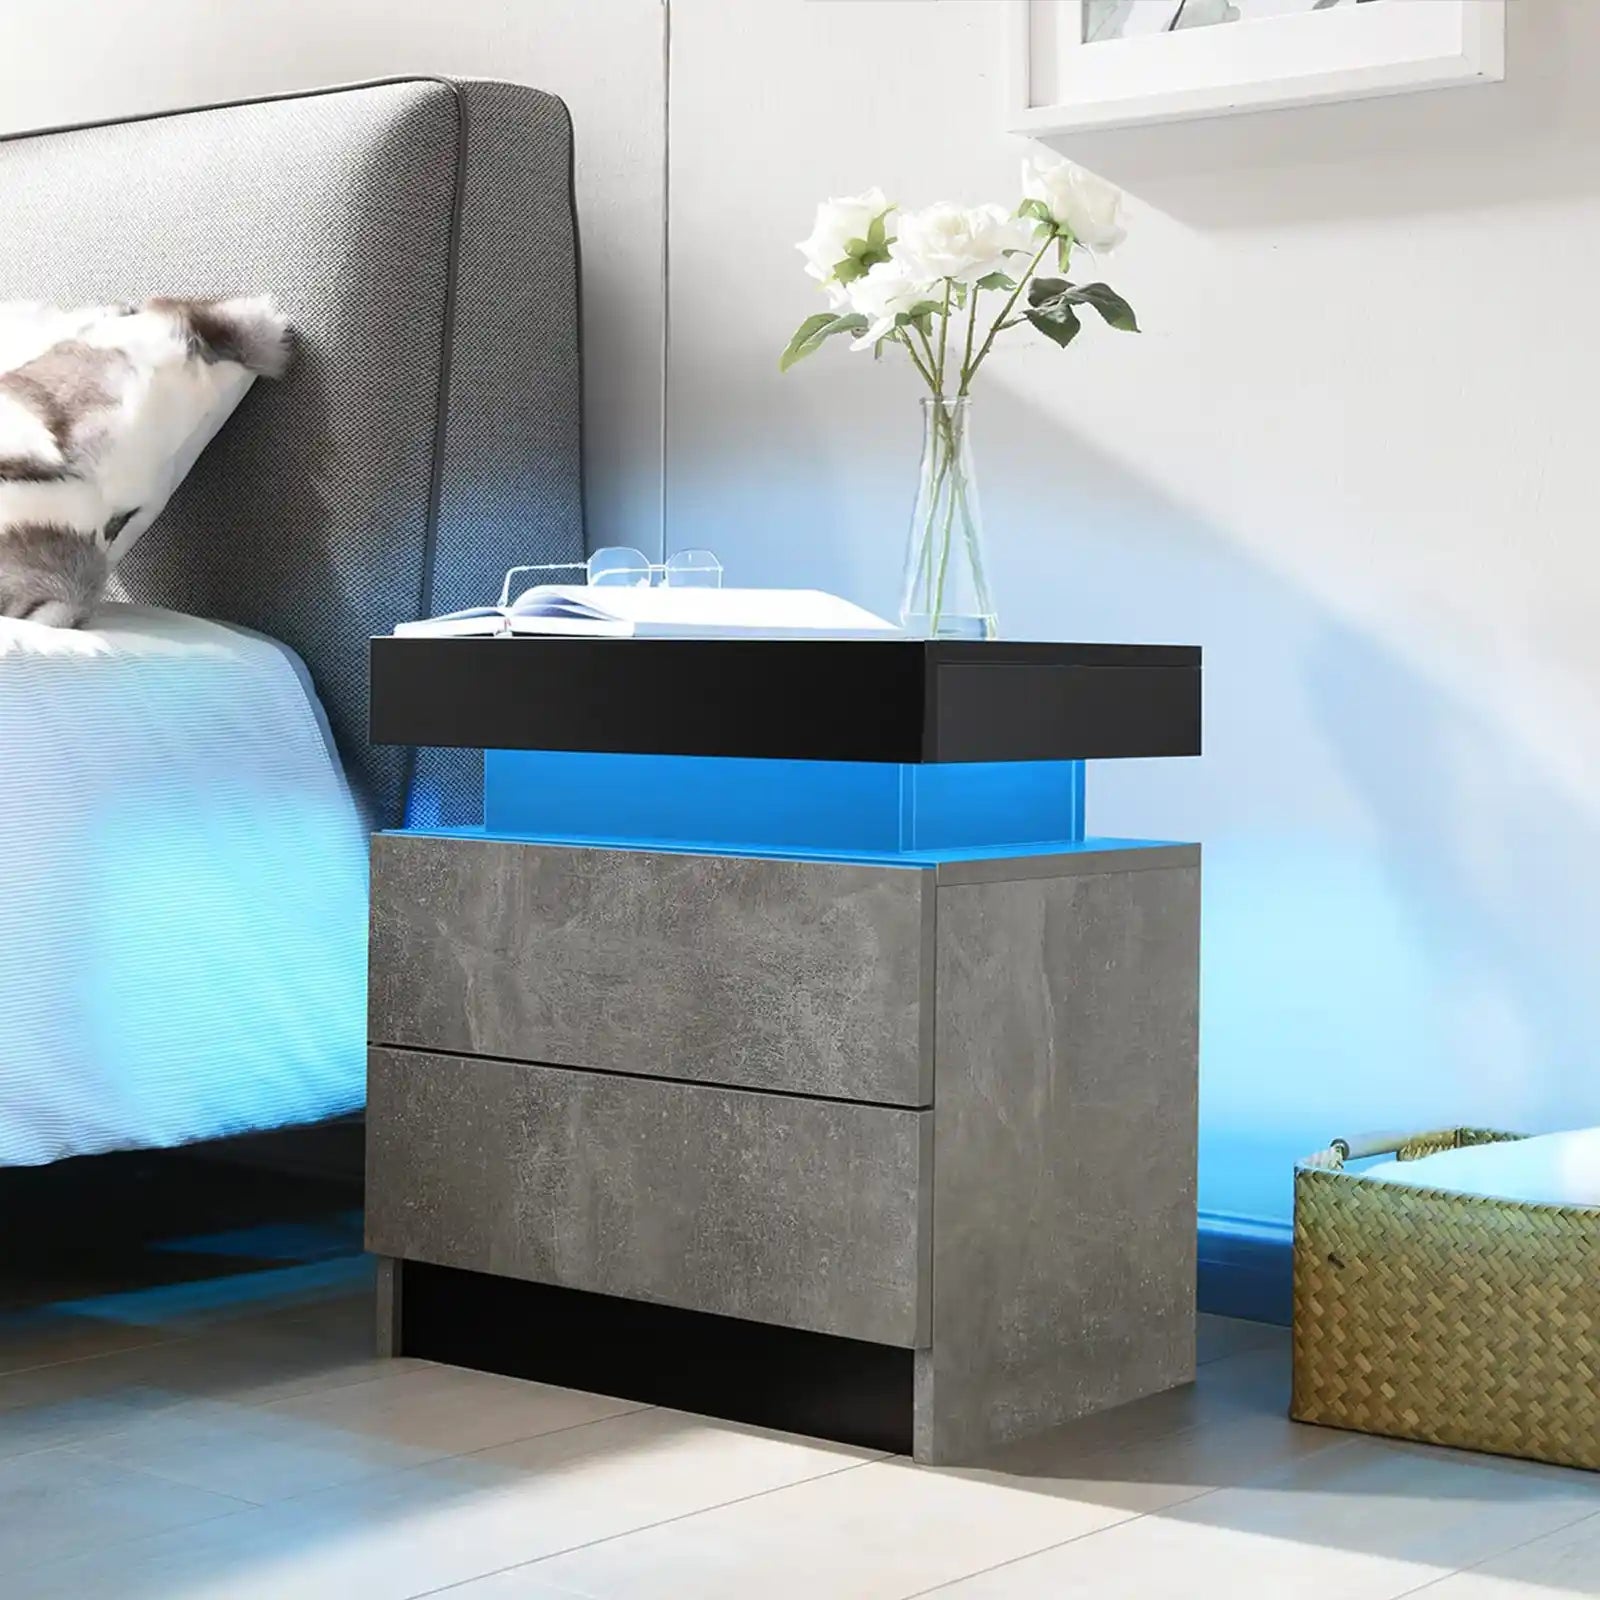 Bedside Table with 2 Drawers, LED Nightstand Wooden Cabinet Unit with LED Lights